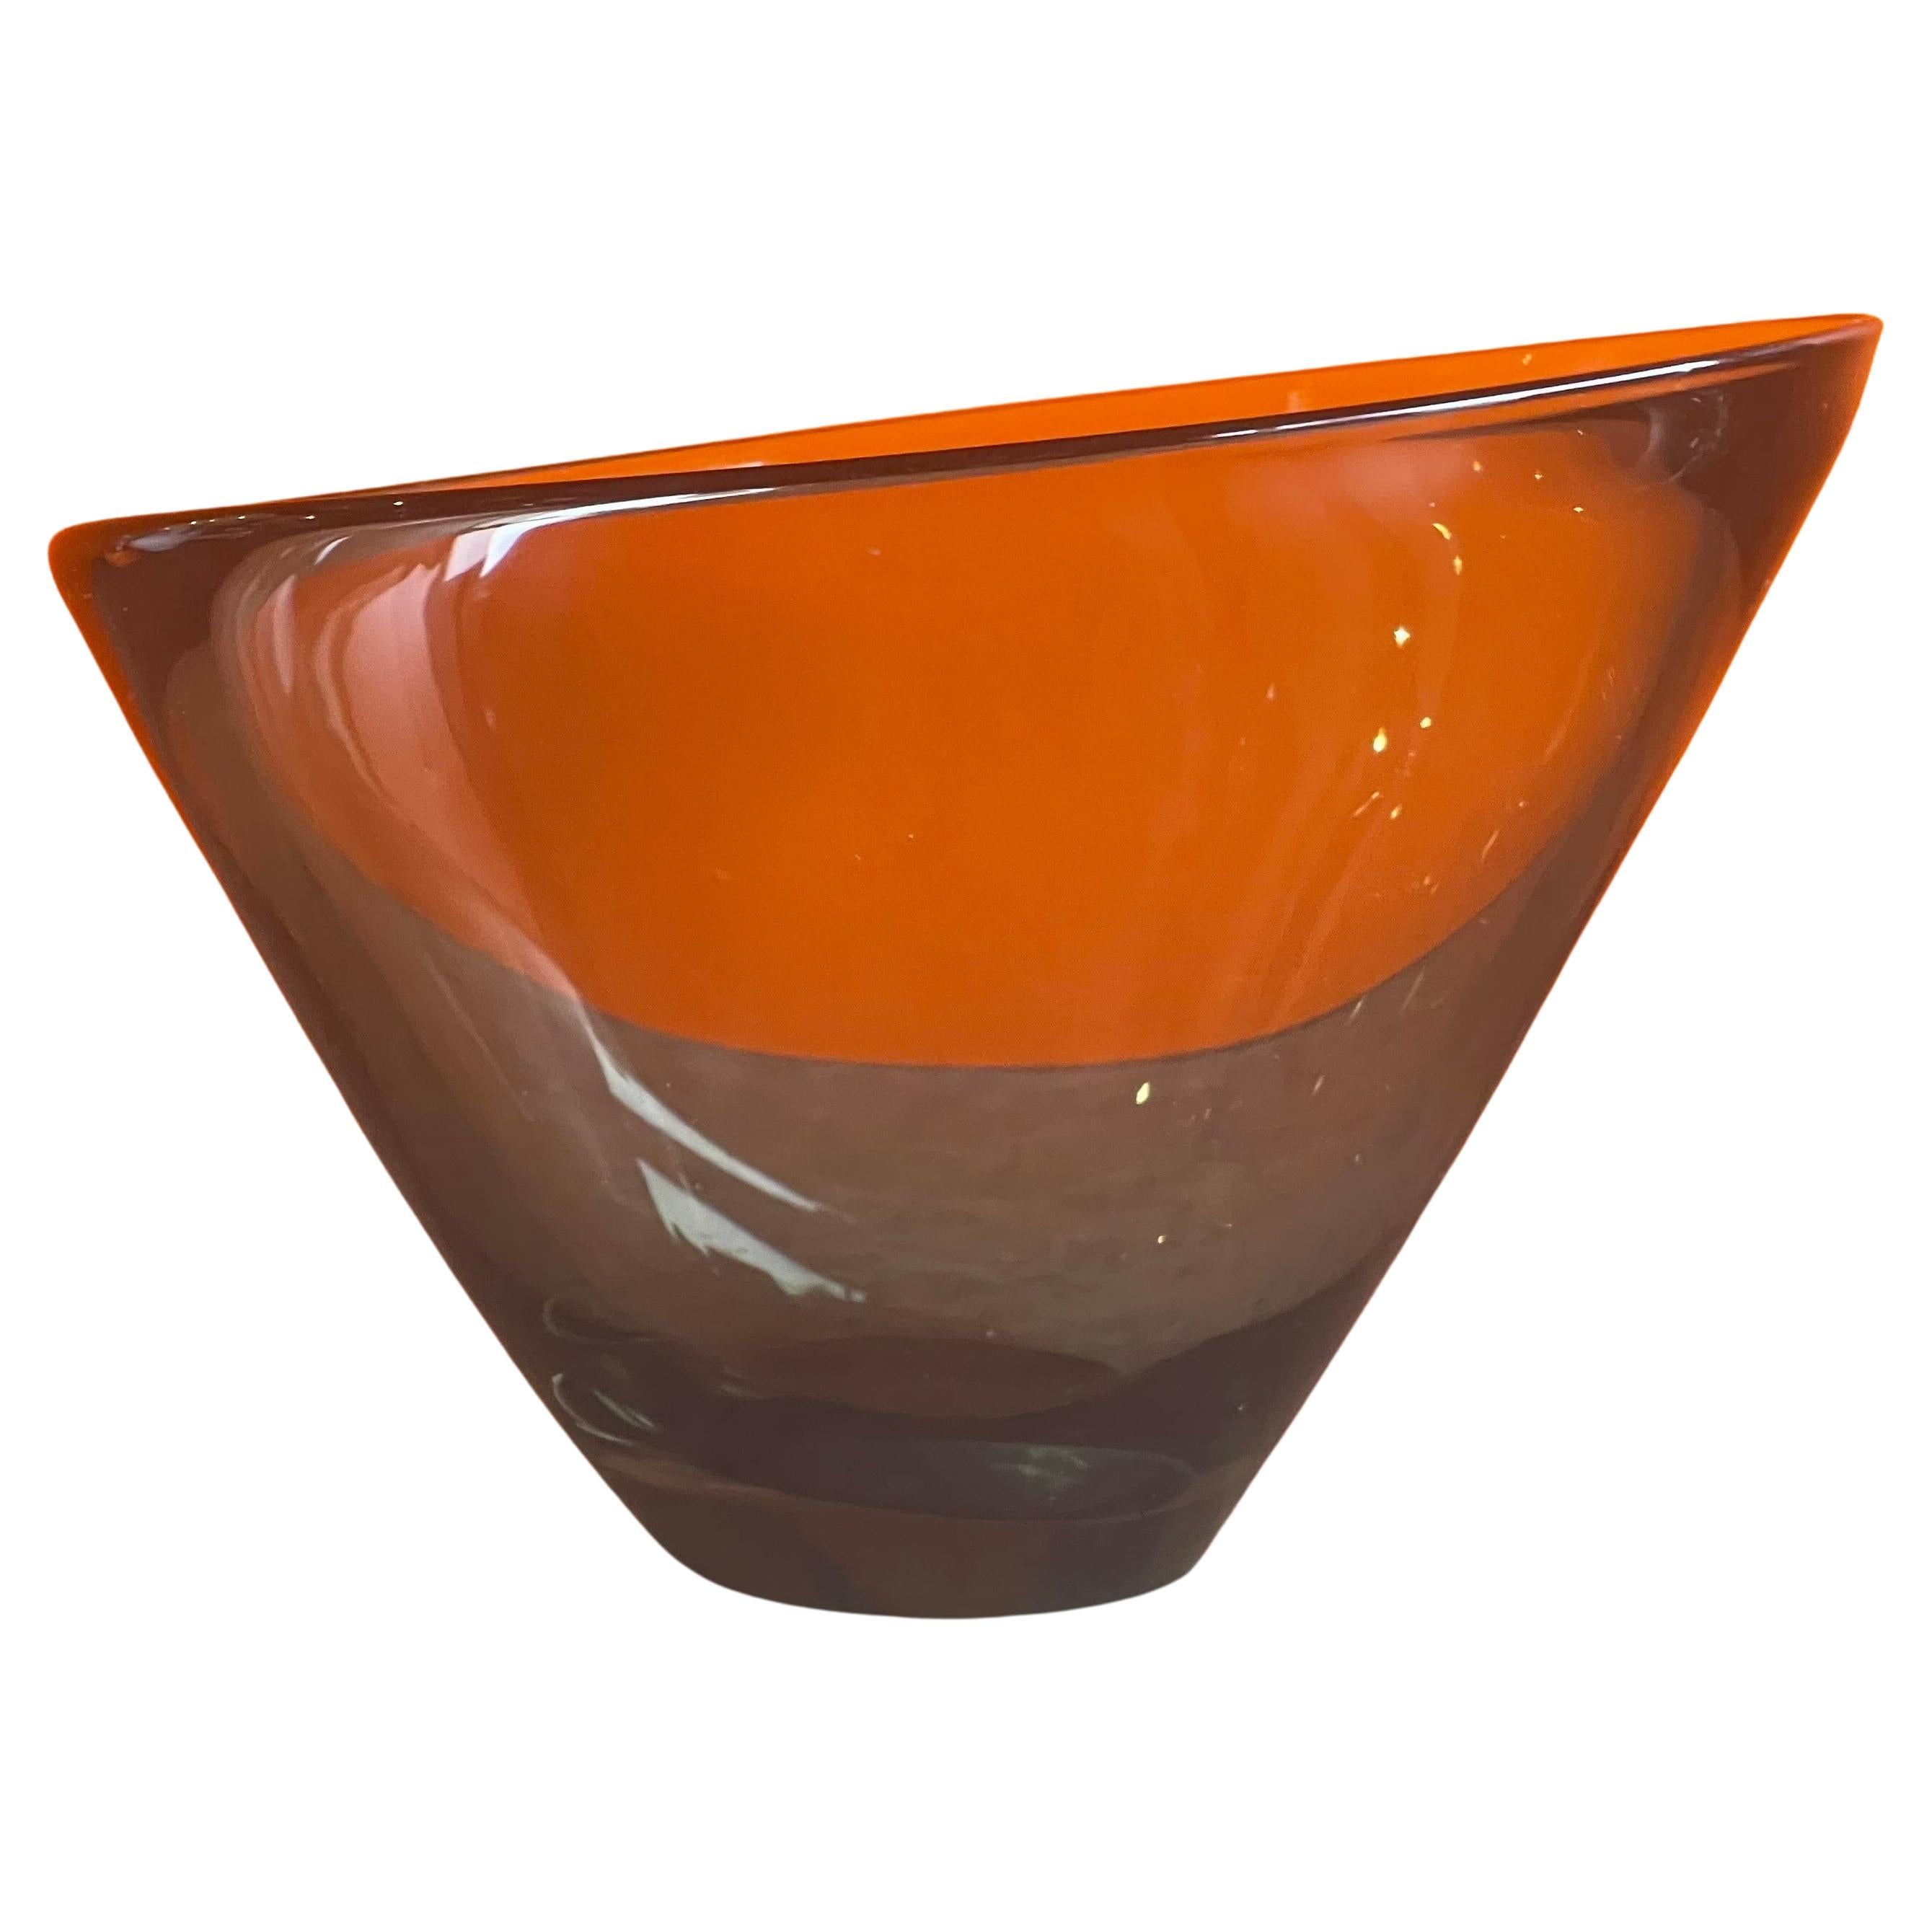 A very attractive hand blown smoked glass center piece bowl by Per Lutken for Holmegaard, circa 1960s. The bowl measures 9.25